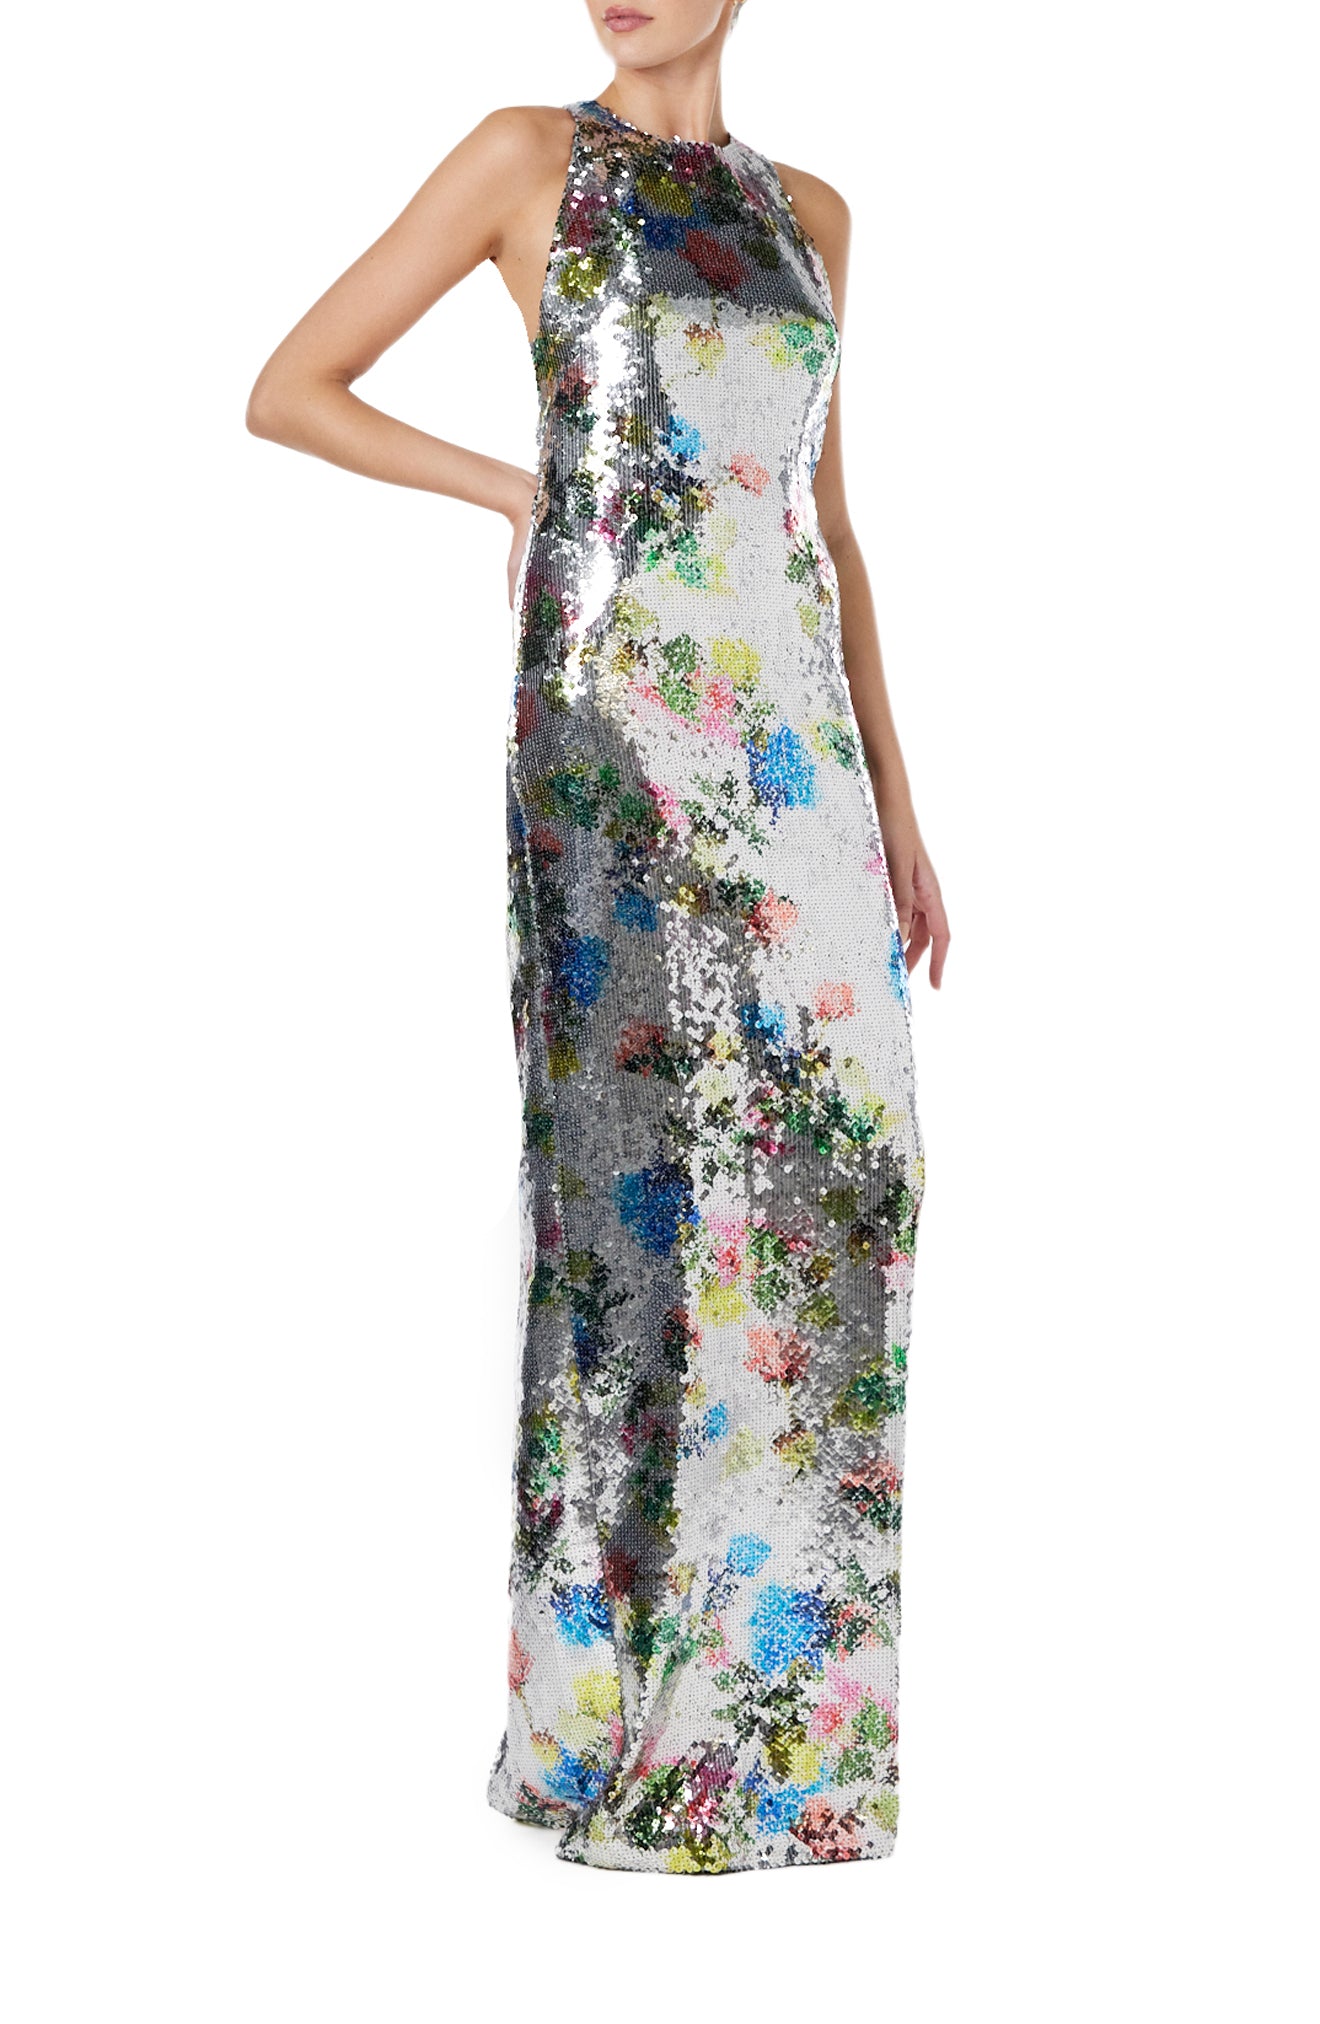 Monique Lhuillier Spring 2024 printed silver sequin colum gown with sleeveless, cut-away neckline - right side.